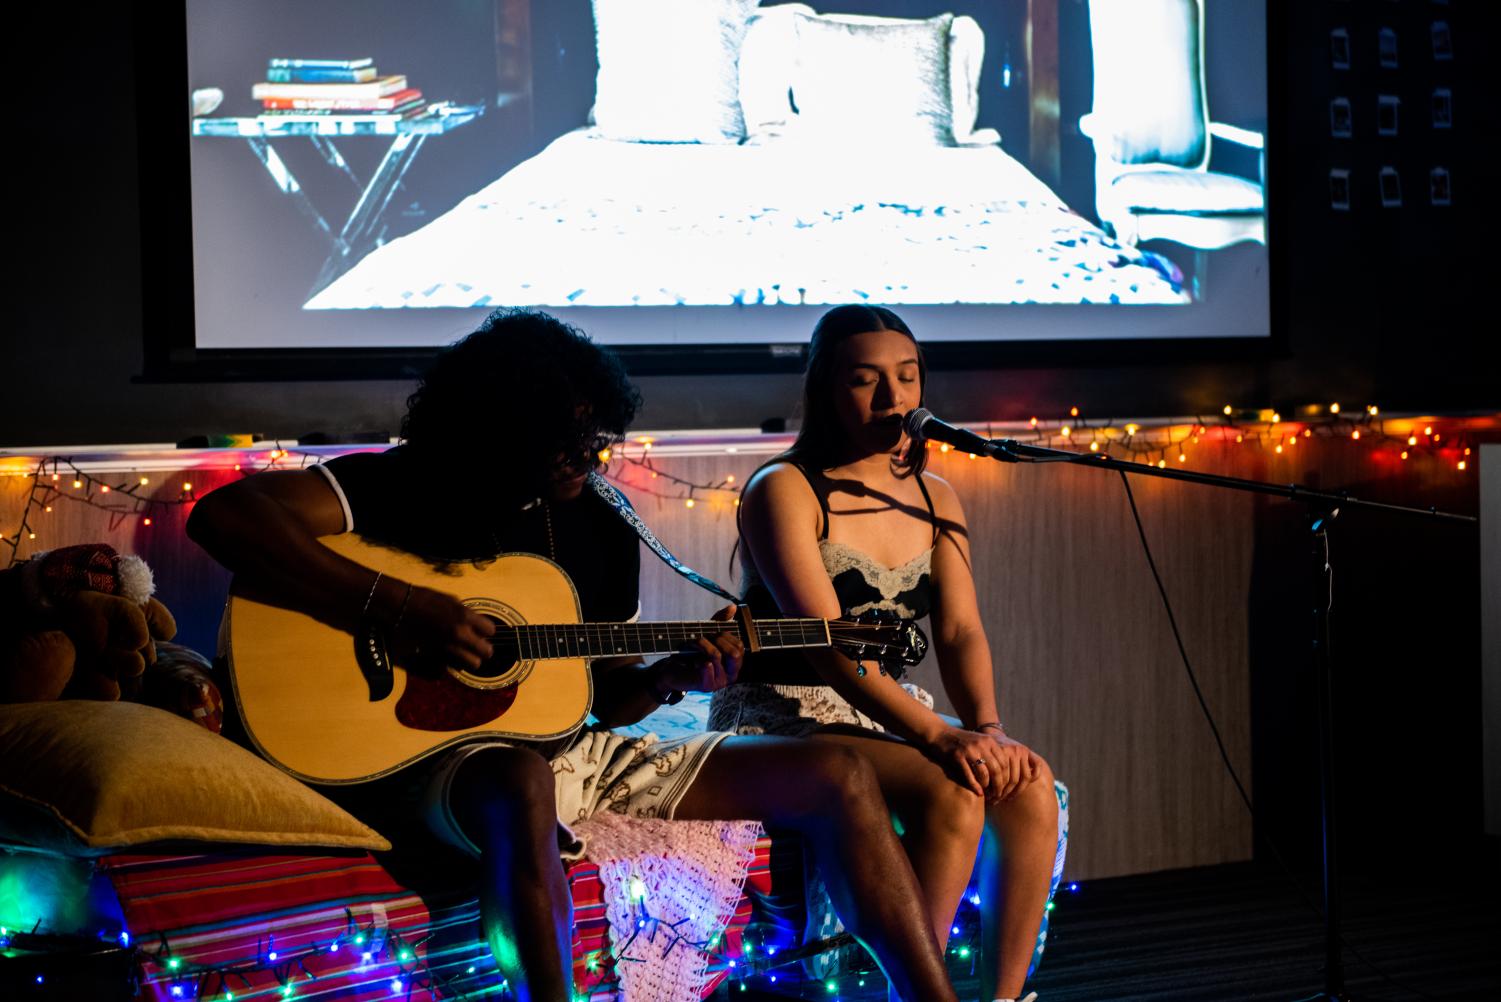 Two performers sit next to each other on a red futon. The one on the left is looking down while playing the guitar, while the other sings into a microphone.